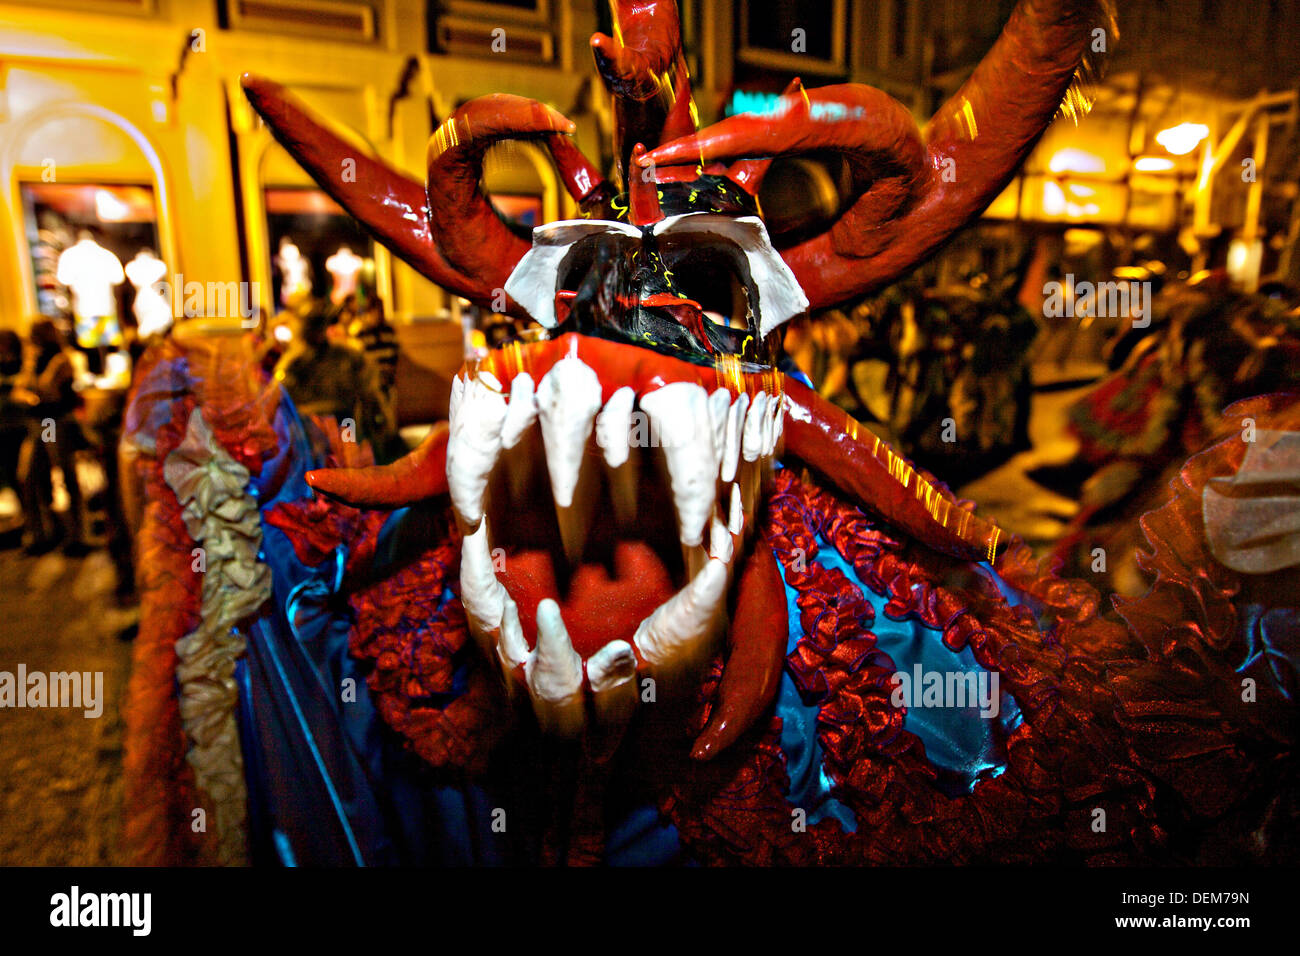 A costumed reveler called vejigante dances in the streets during the Carnaval de Ponce February 21, 2009 in Ponce, Puerto Rico. Vejigantes are a folkloric character representing the devil. Stock Photo